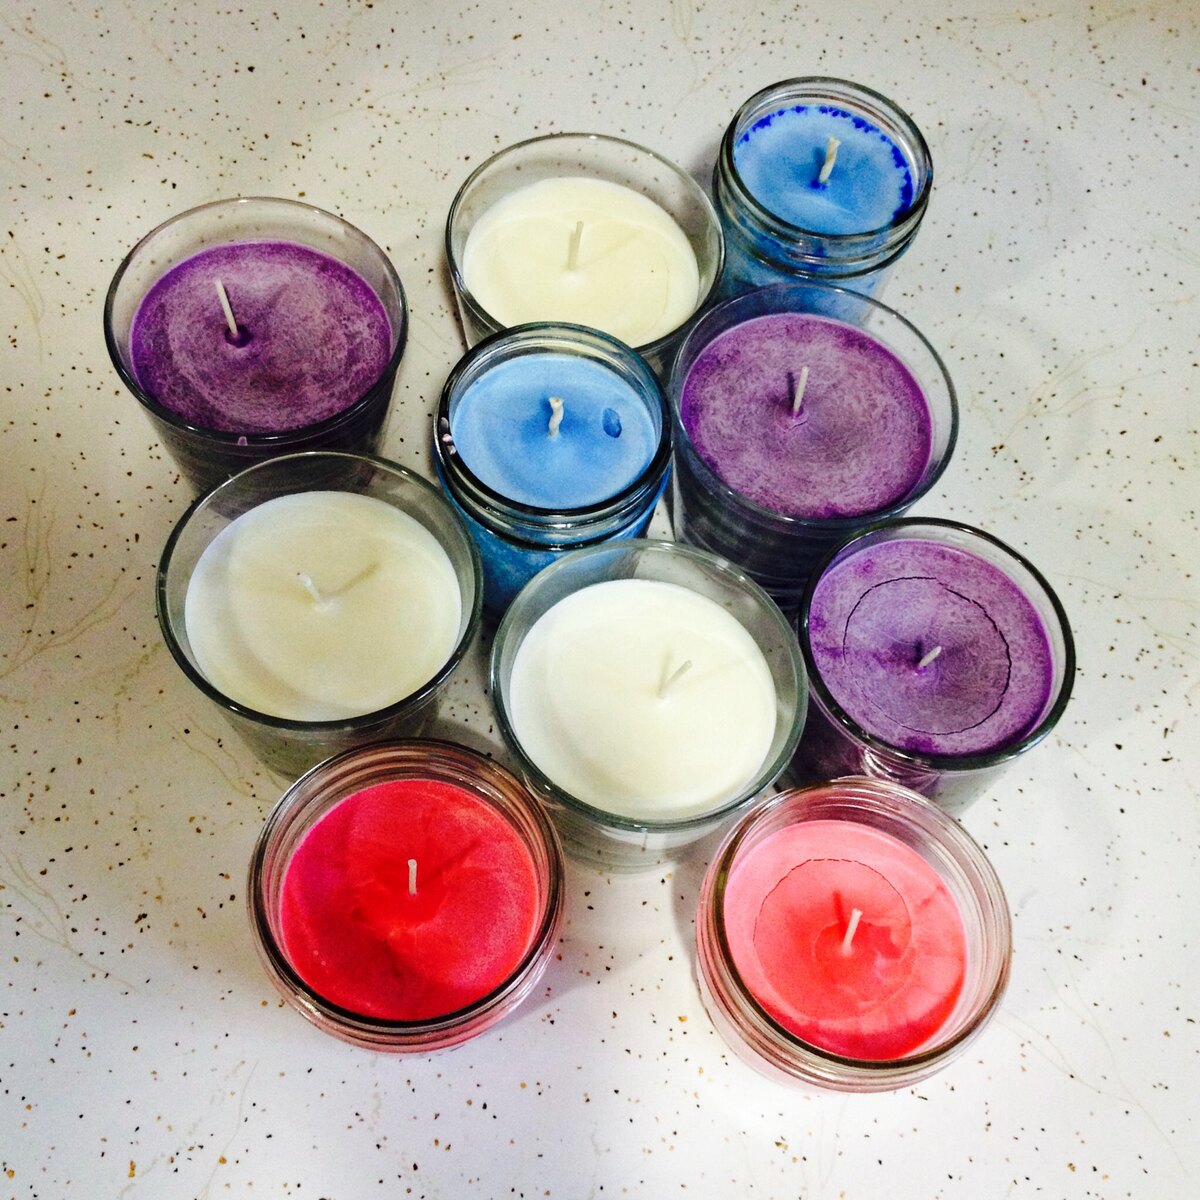 How To Get A Strong Scent Throw In Soy Candles